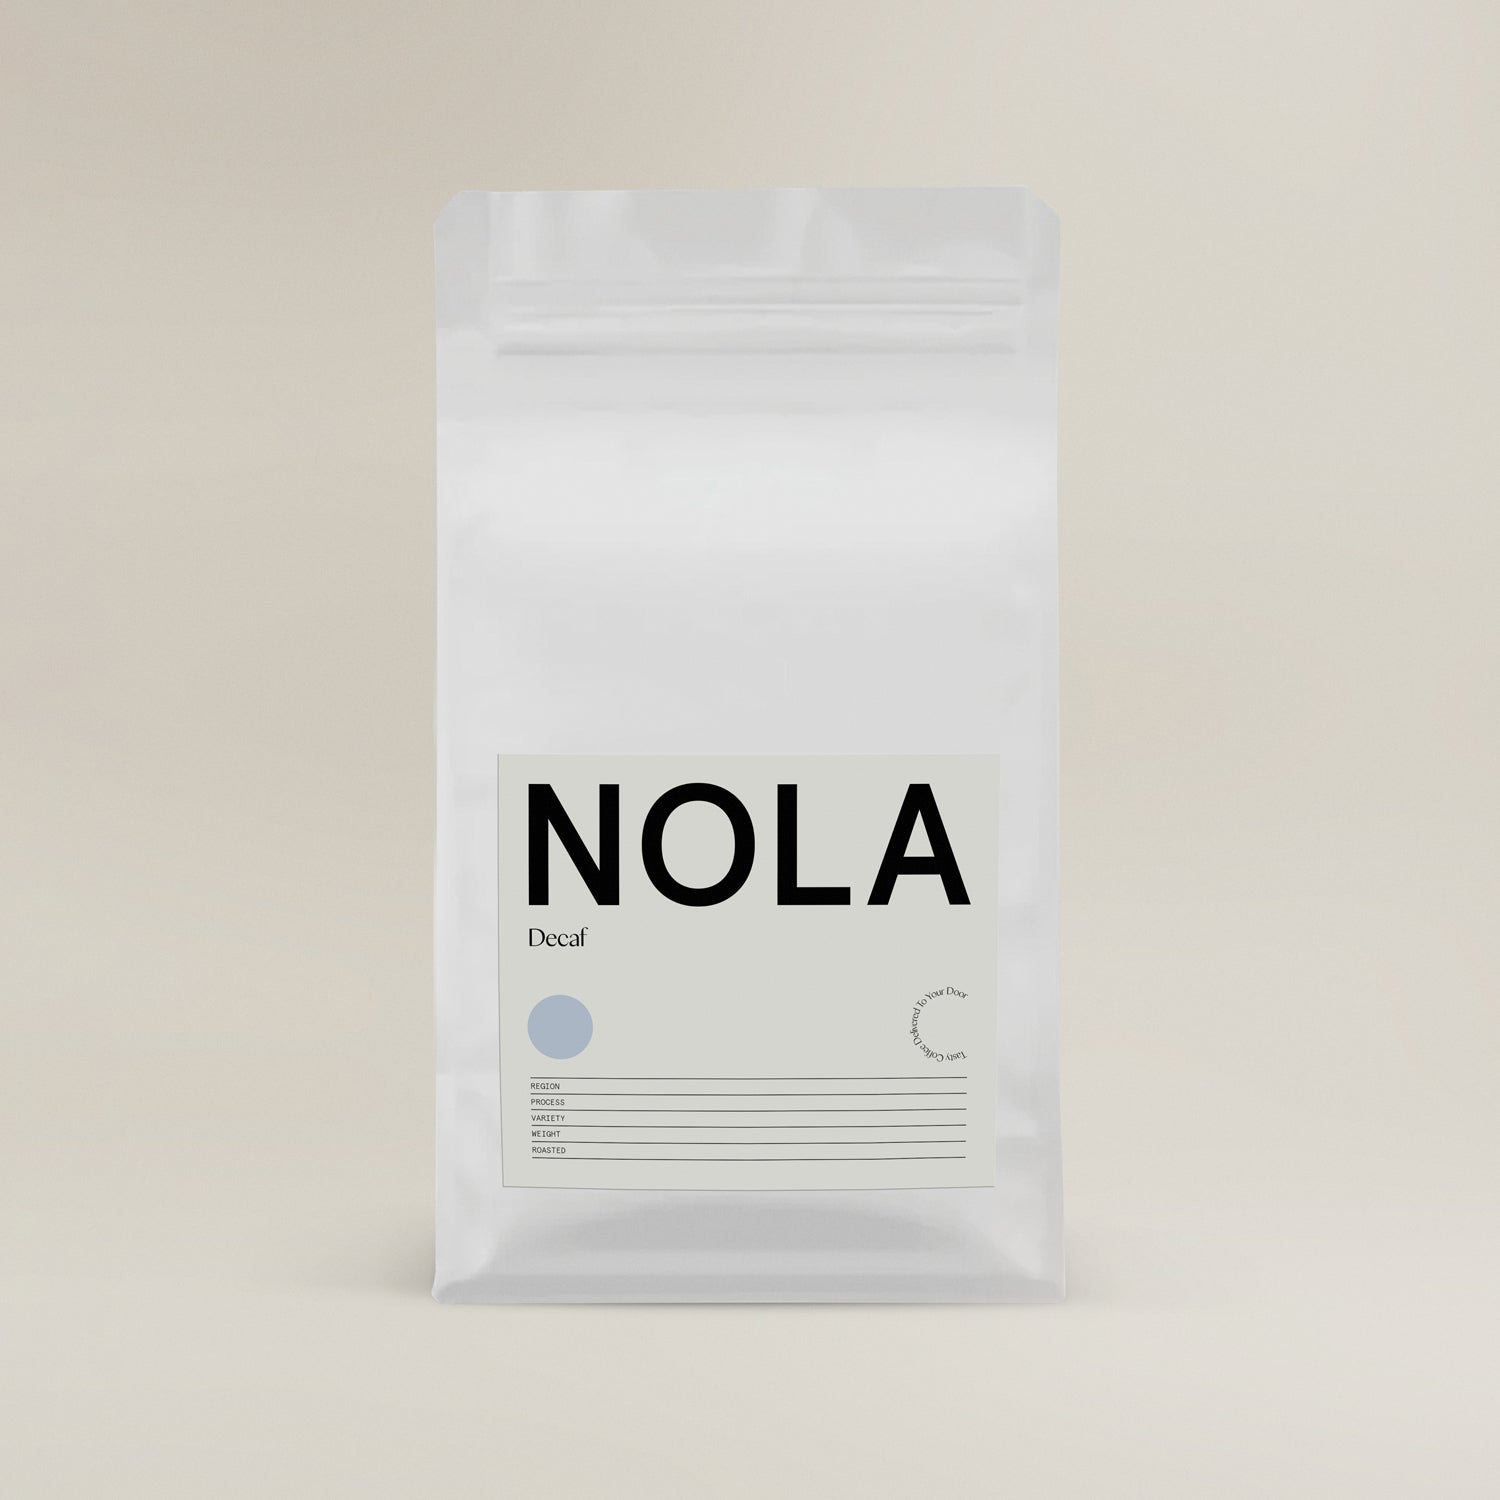 Our decaf Nola coffee beans that we use in our Peckham store